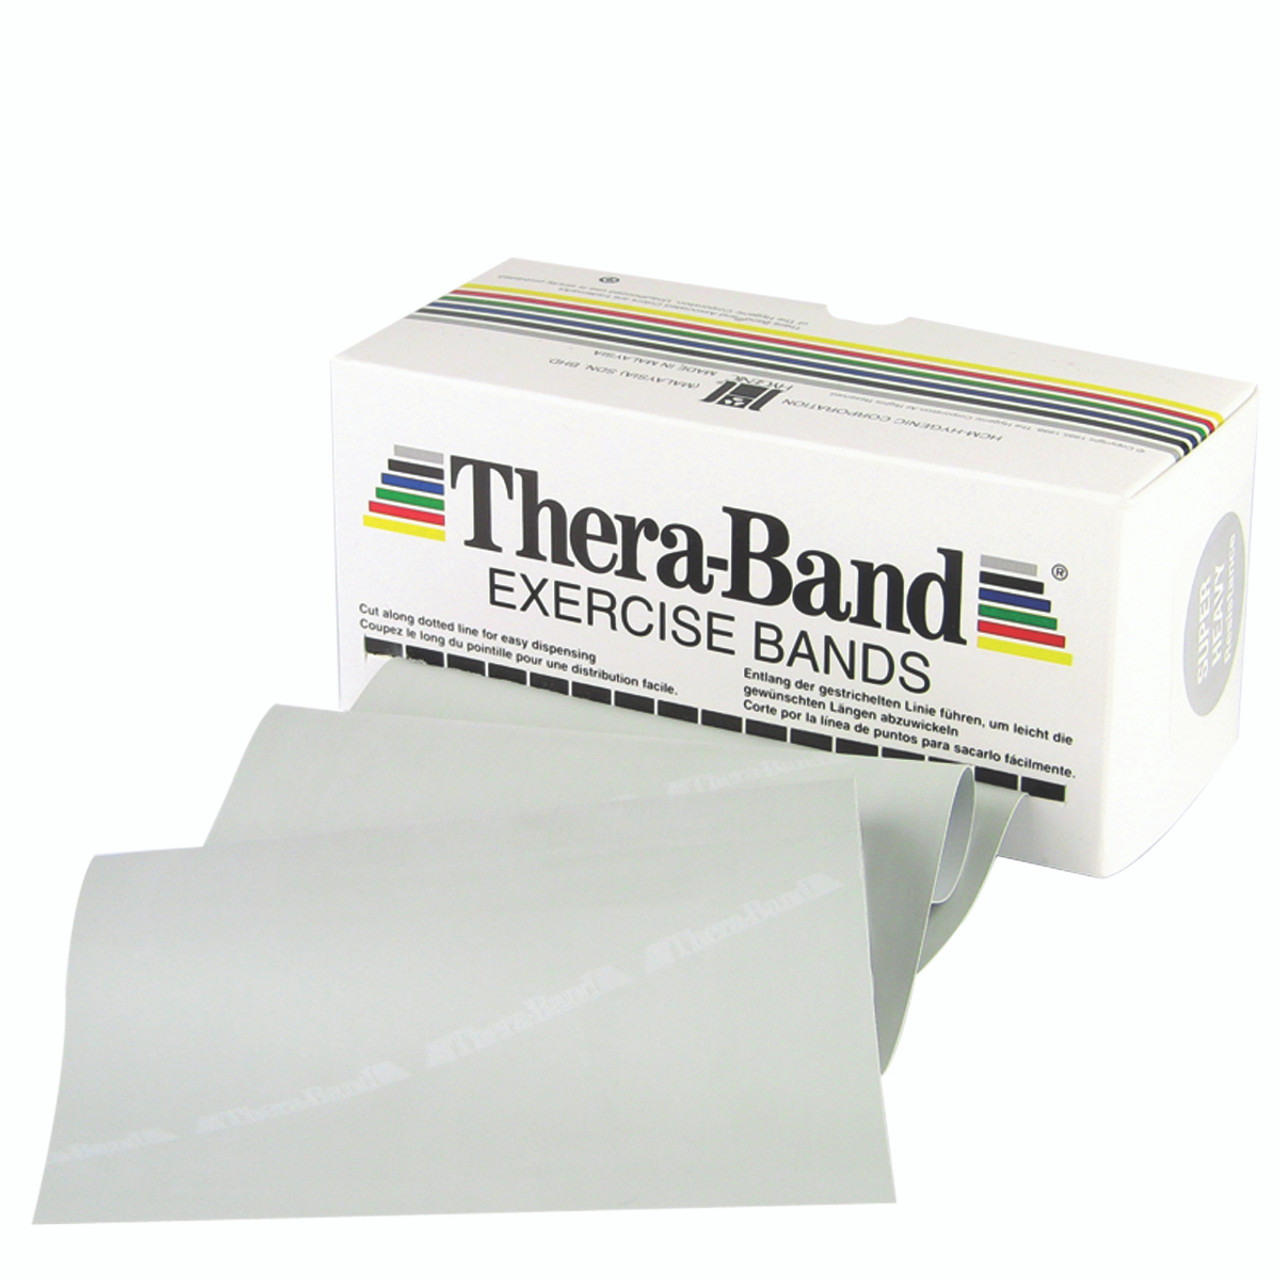 TheraBand¨ exercise band - 6 yard roll - Silver - super heavy